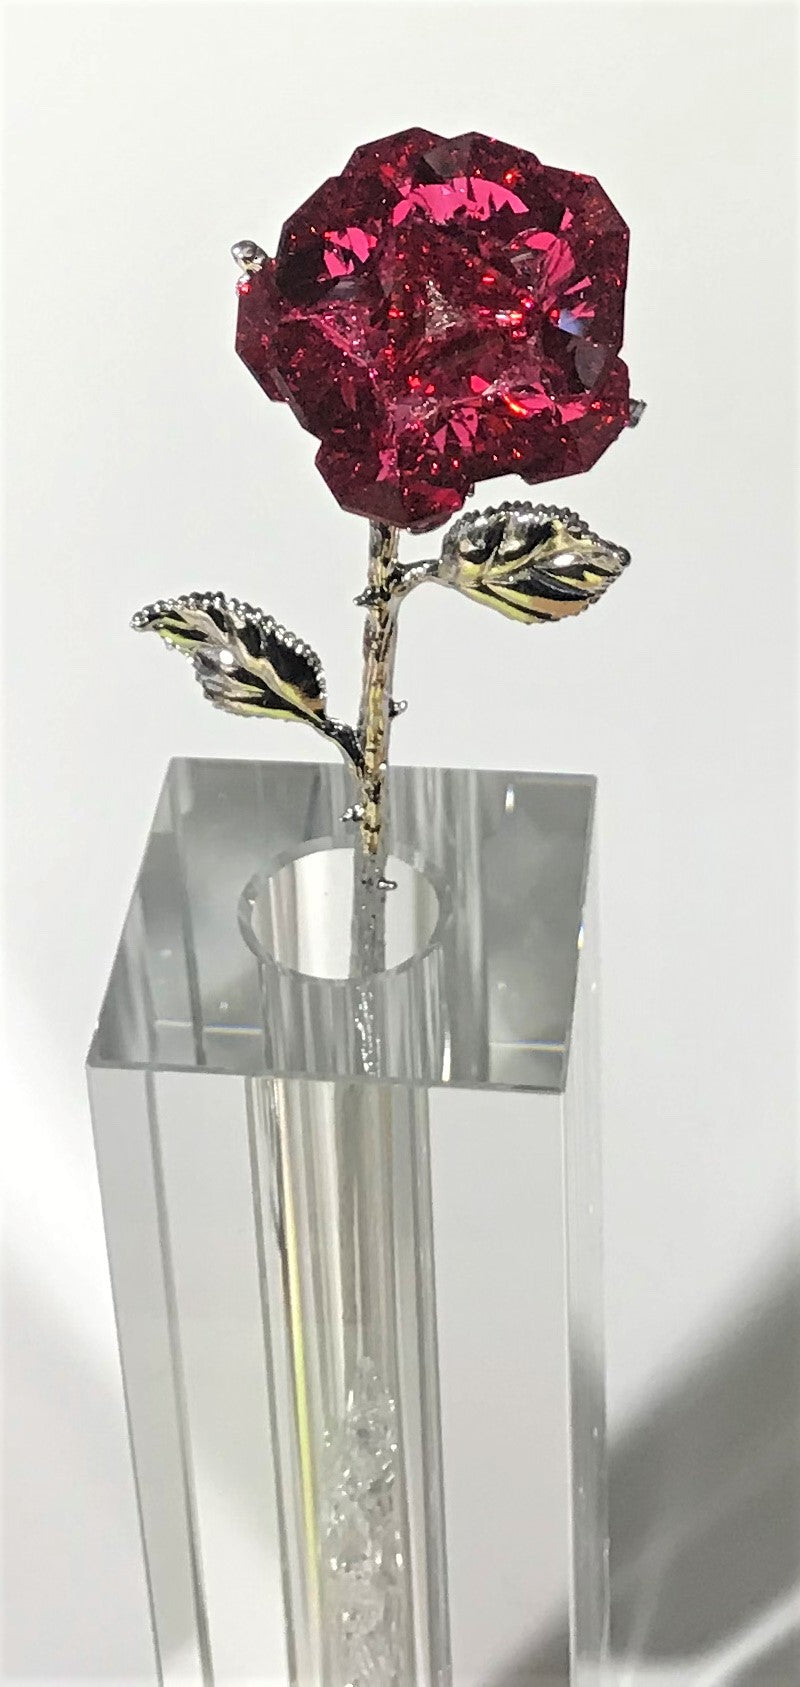 Sparkling Red Crystal Rose In Stunning 7 Inch Tall Crystal Vase - Red Crystal Flower